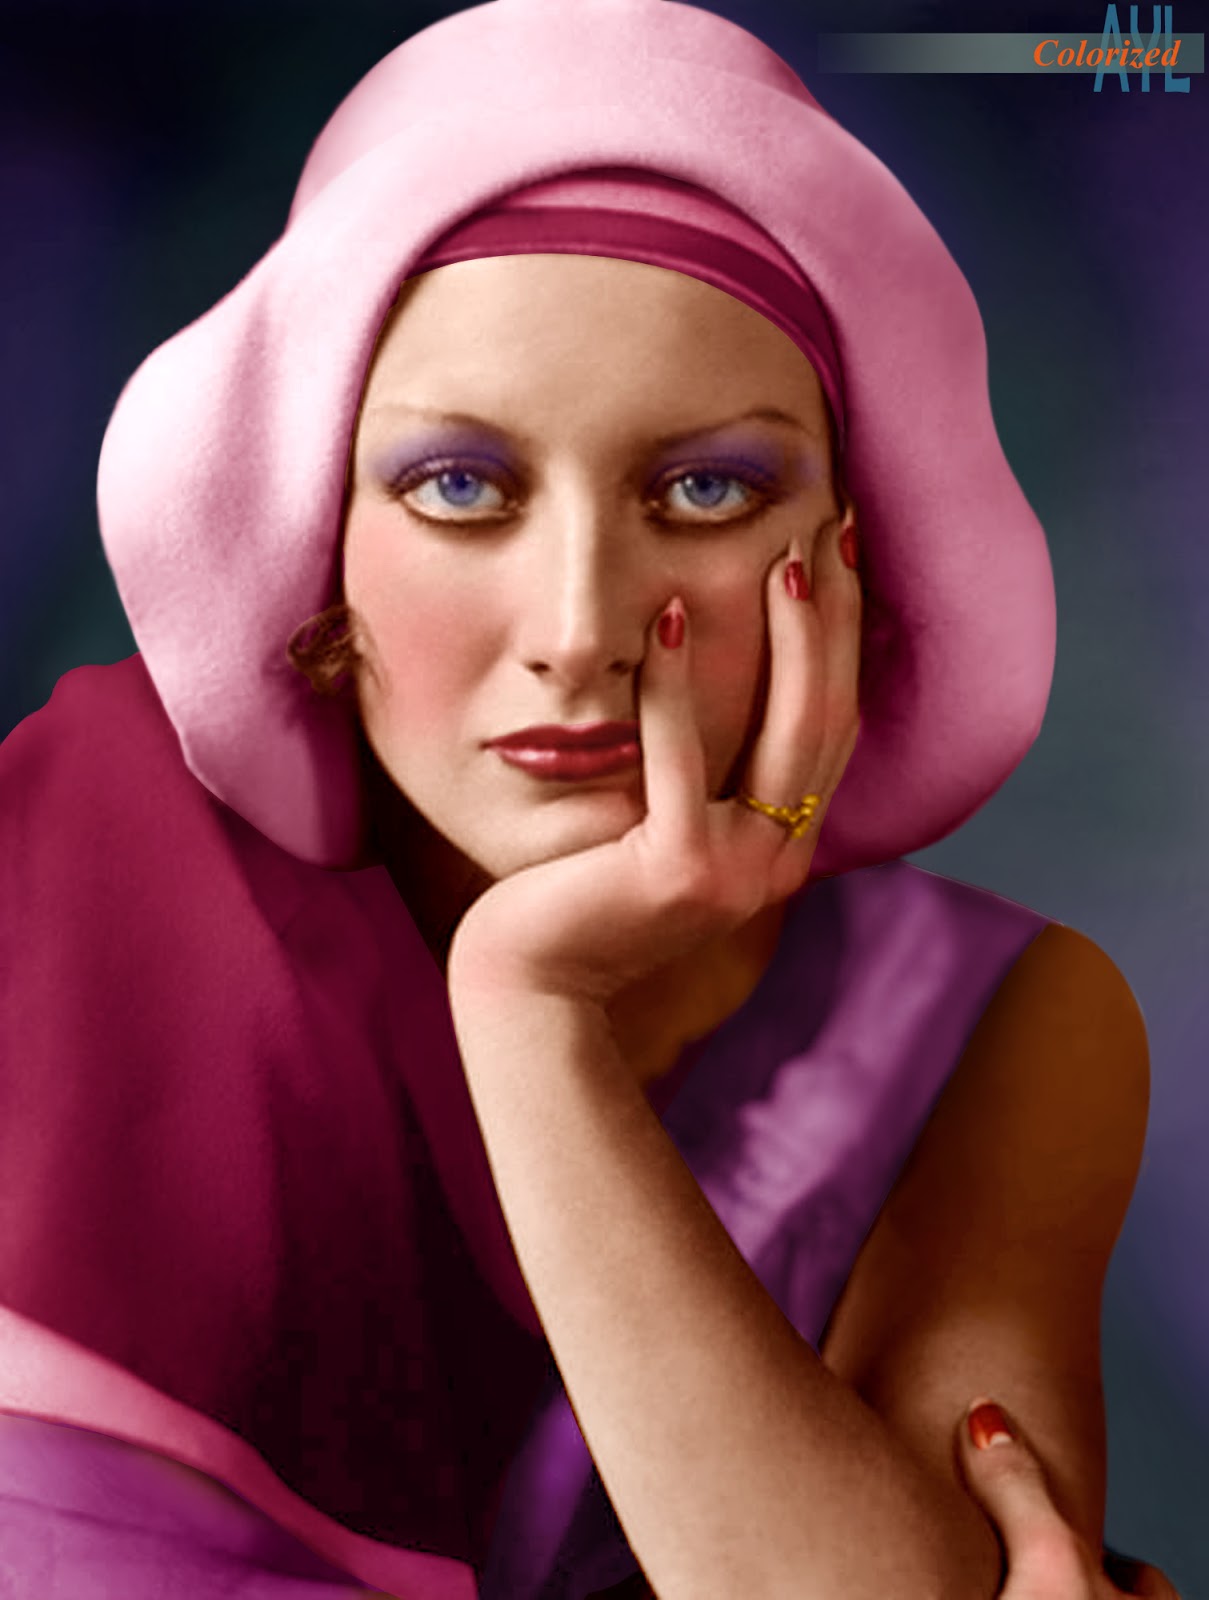 Colors for a Bygone Era: Colorized_Joan Crawford, circa 1920